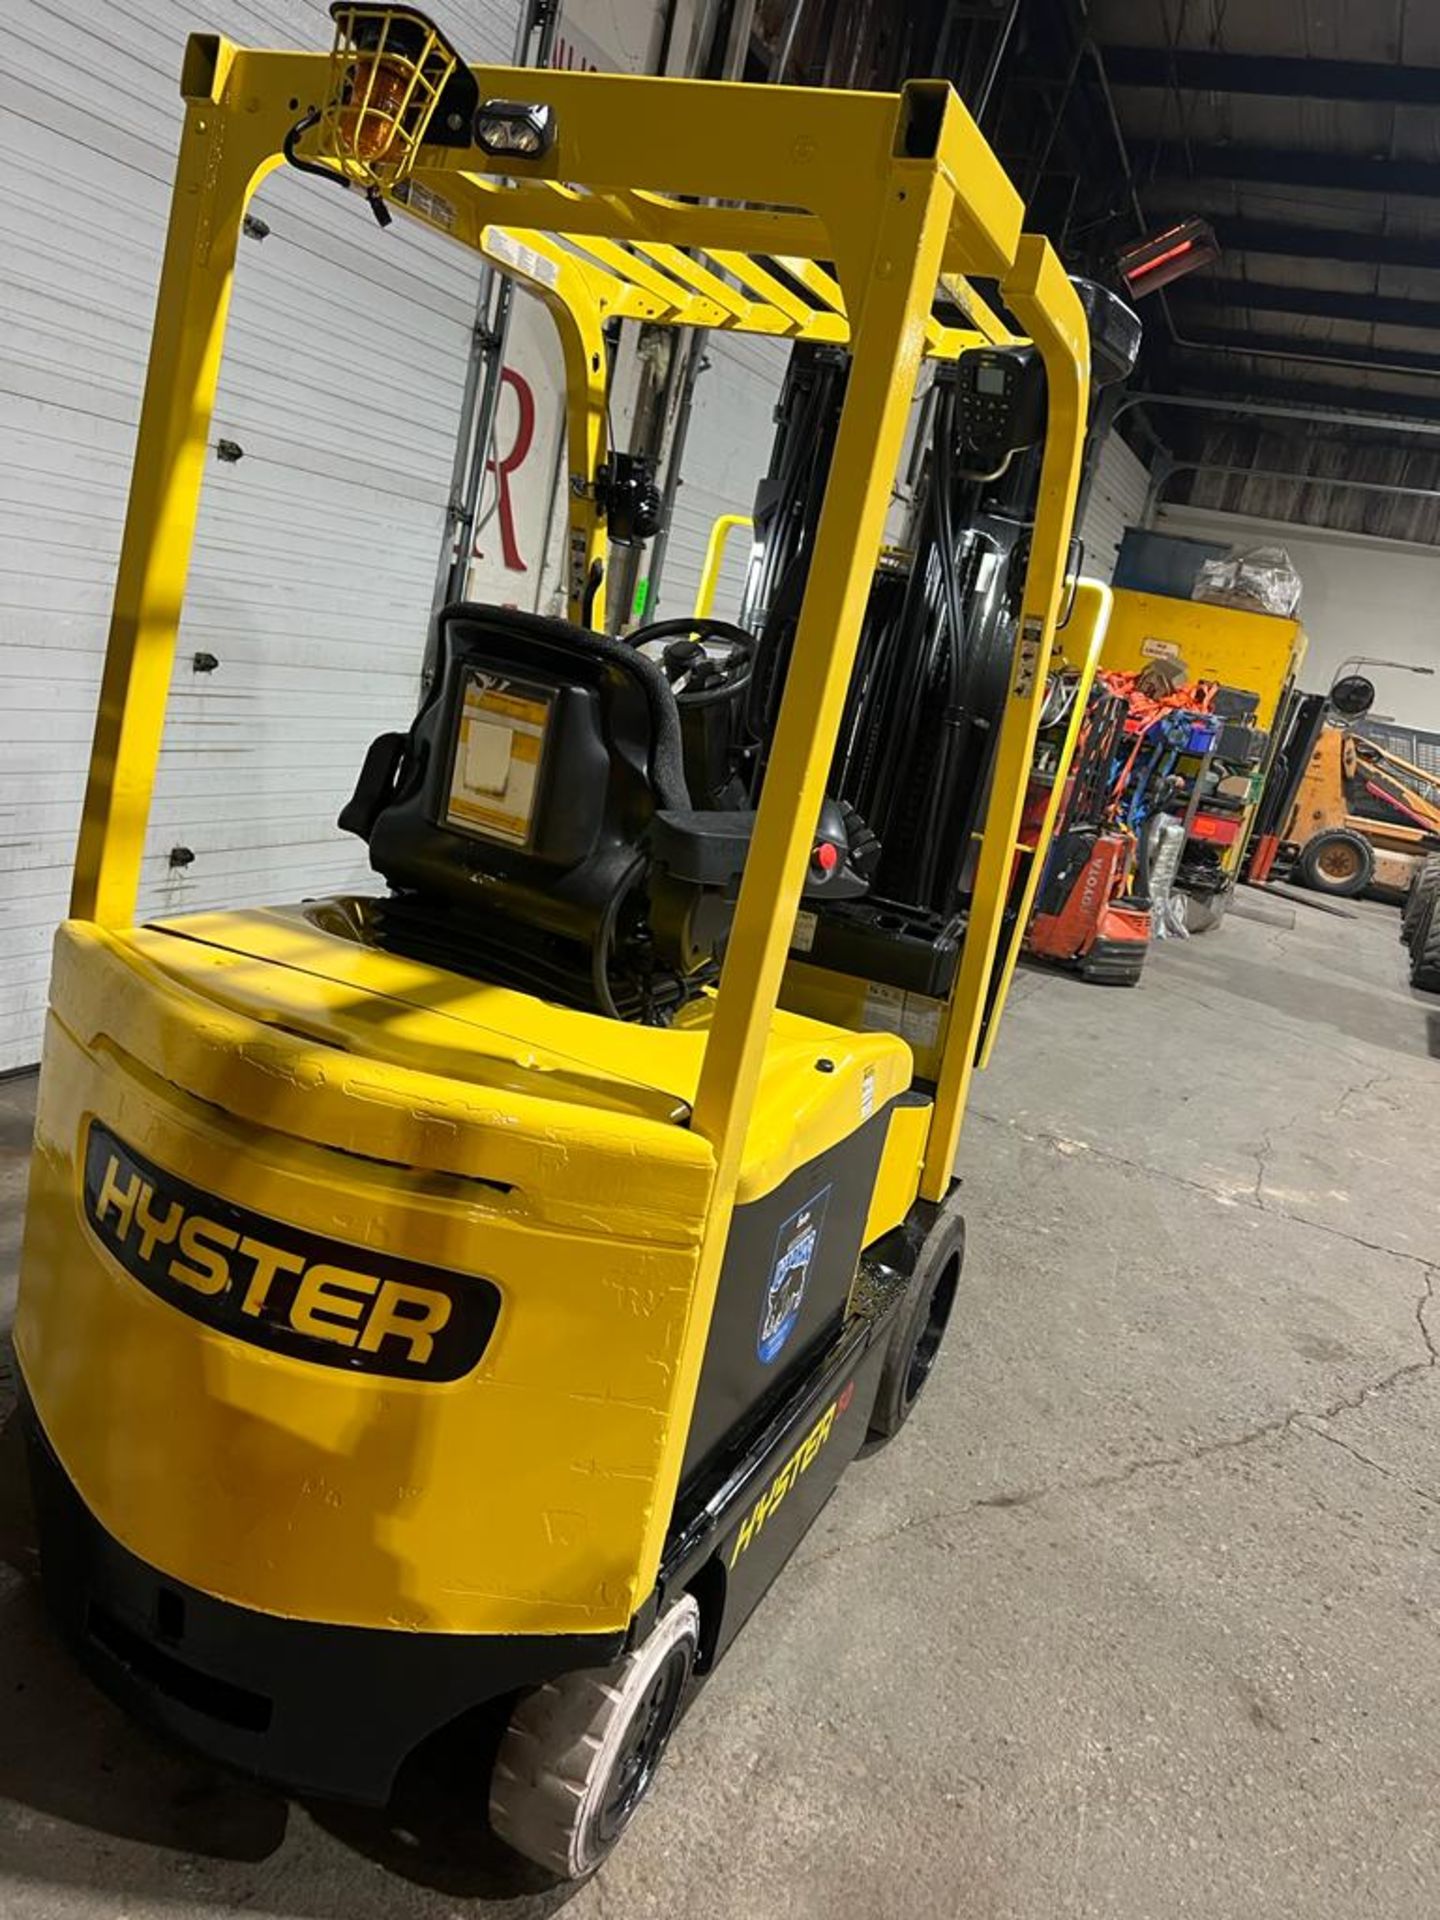 2013 Hyster 5,000lbs Capacity Forklift 4-STAGE MAST Electric 48V with Sideshift & Safety to APR 2024 - Bild 5 aus 5